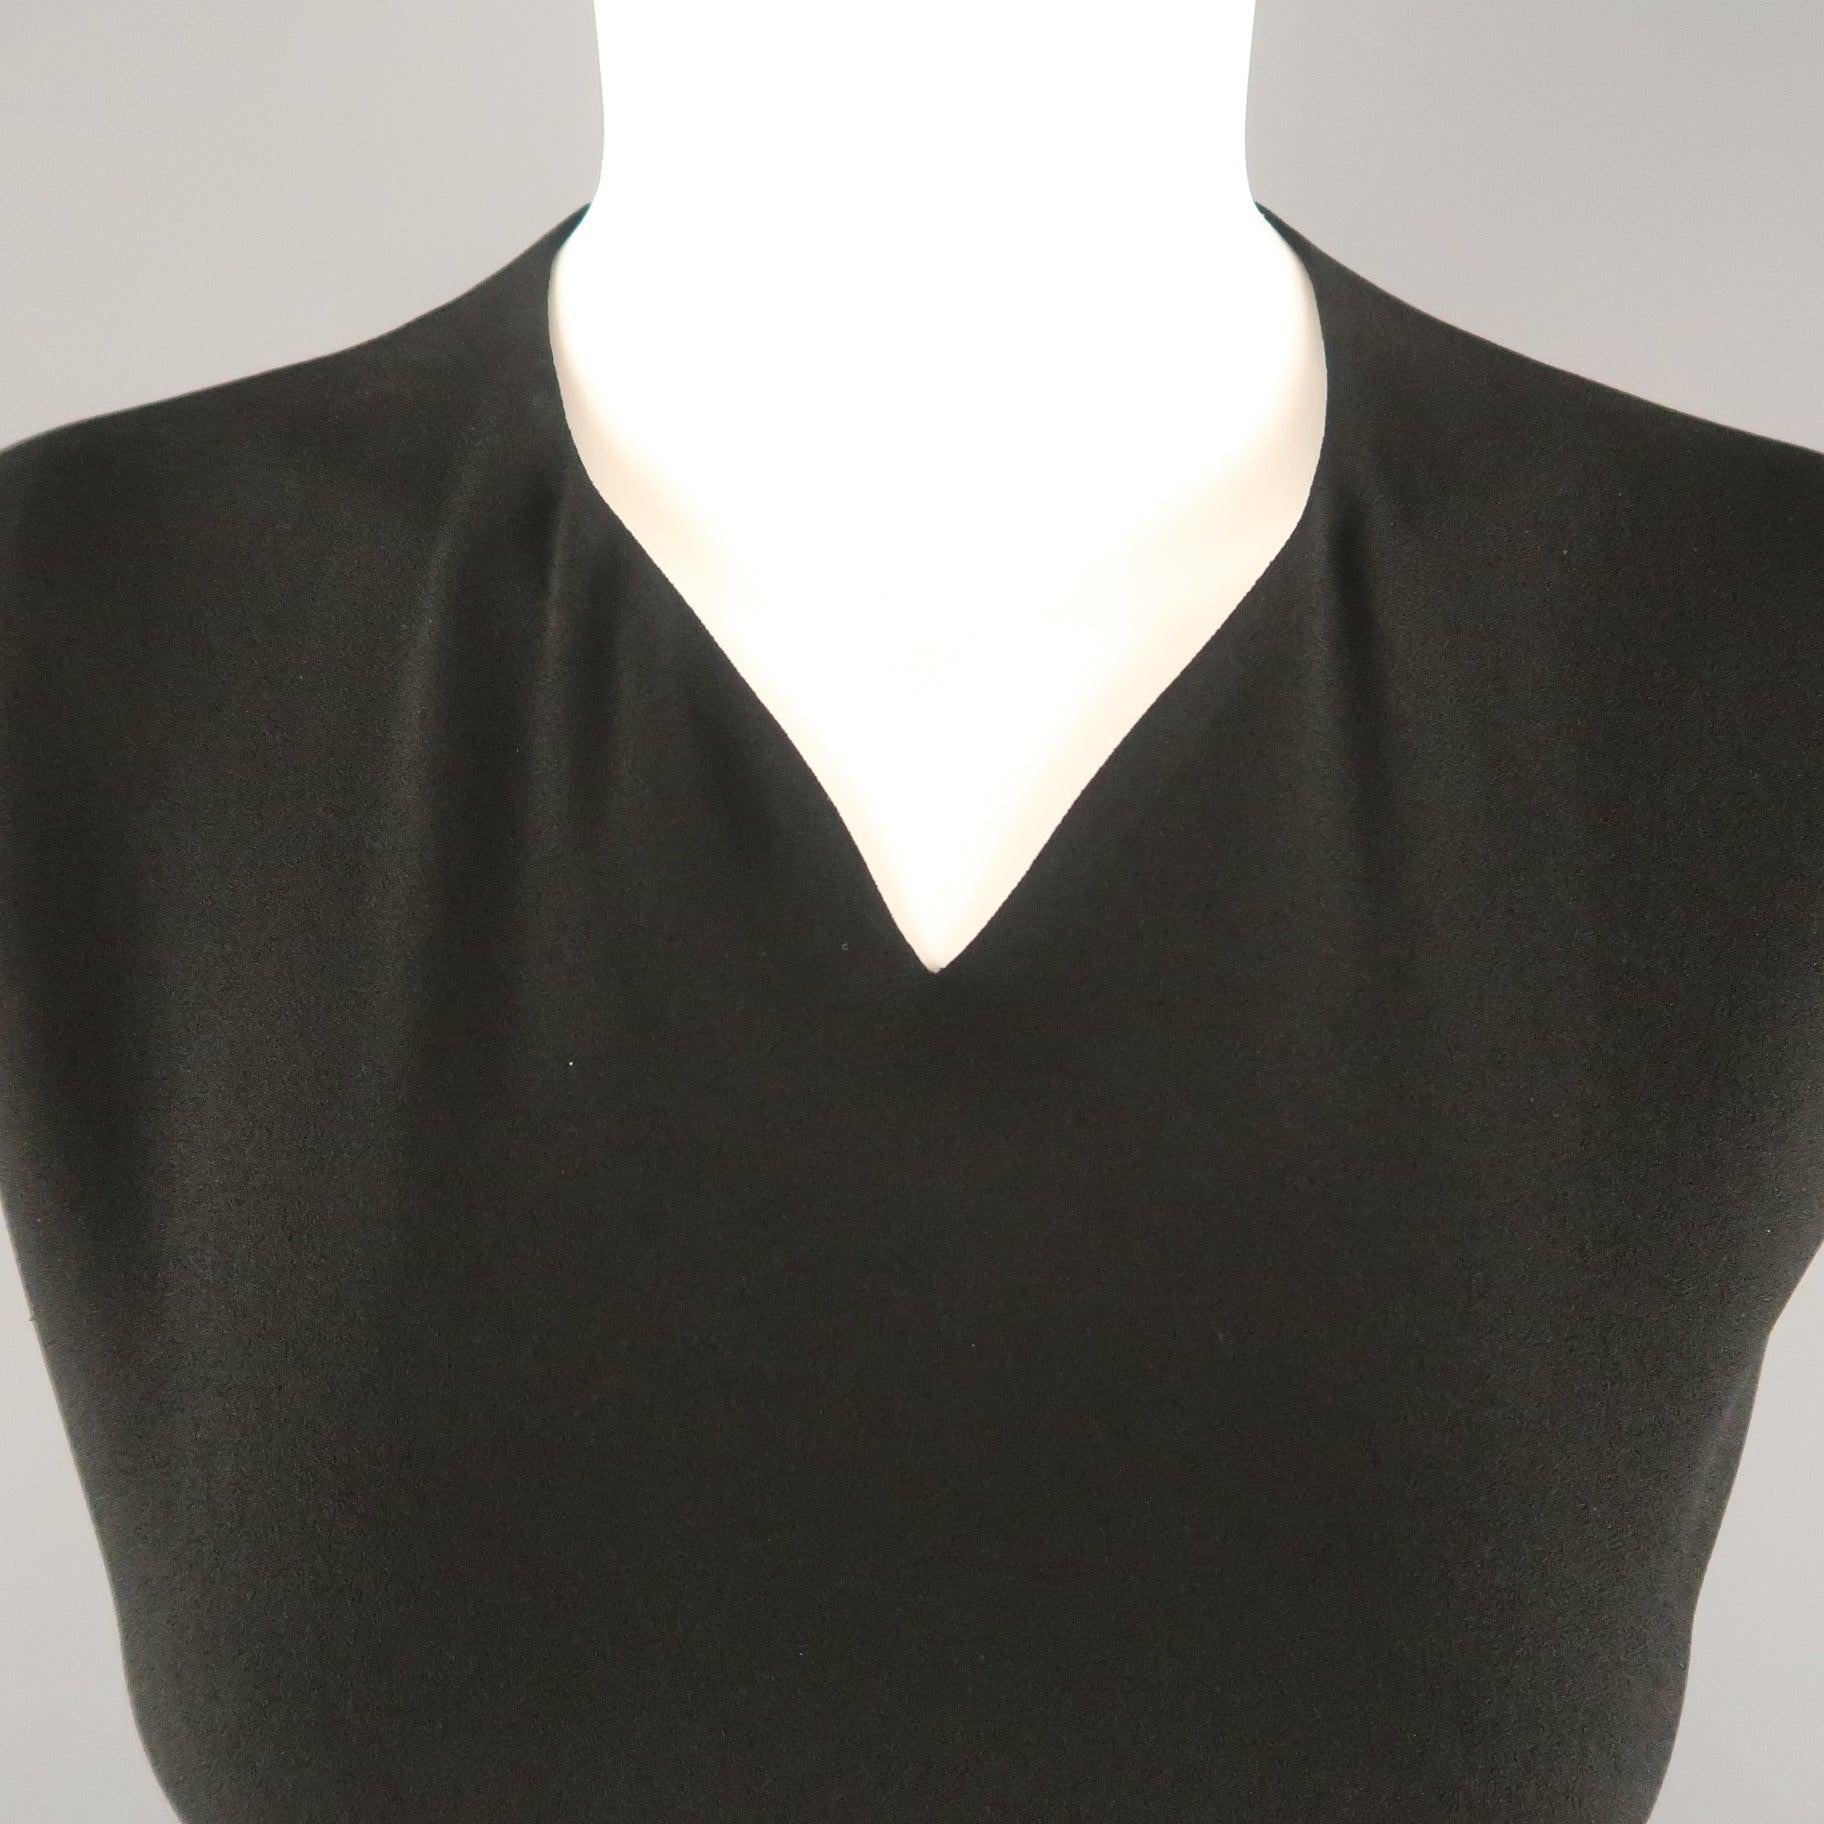 JIL SANDER shift dress comes in black crepe with a V neck, 
and back slit cutouts. Made in Italy.
Excellent Pre-Owned Condition.
 

Marked:  IT 40
 

Measurements: 
 
l	Shoulder: 15.5 inches 
l	Bust: 38 inches 
l	Waist: 34 inches 
l	Hip: 40 inches